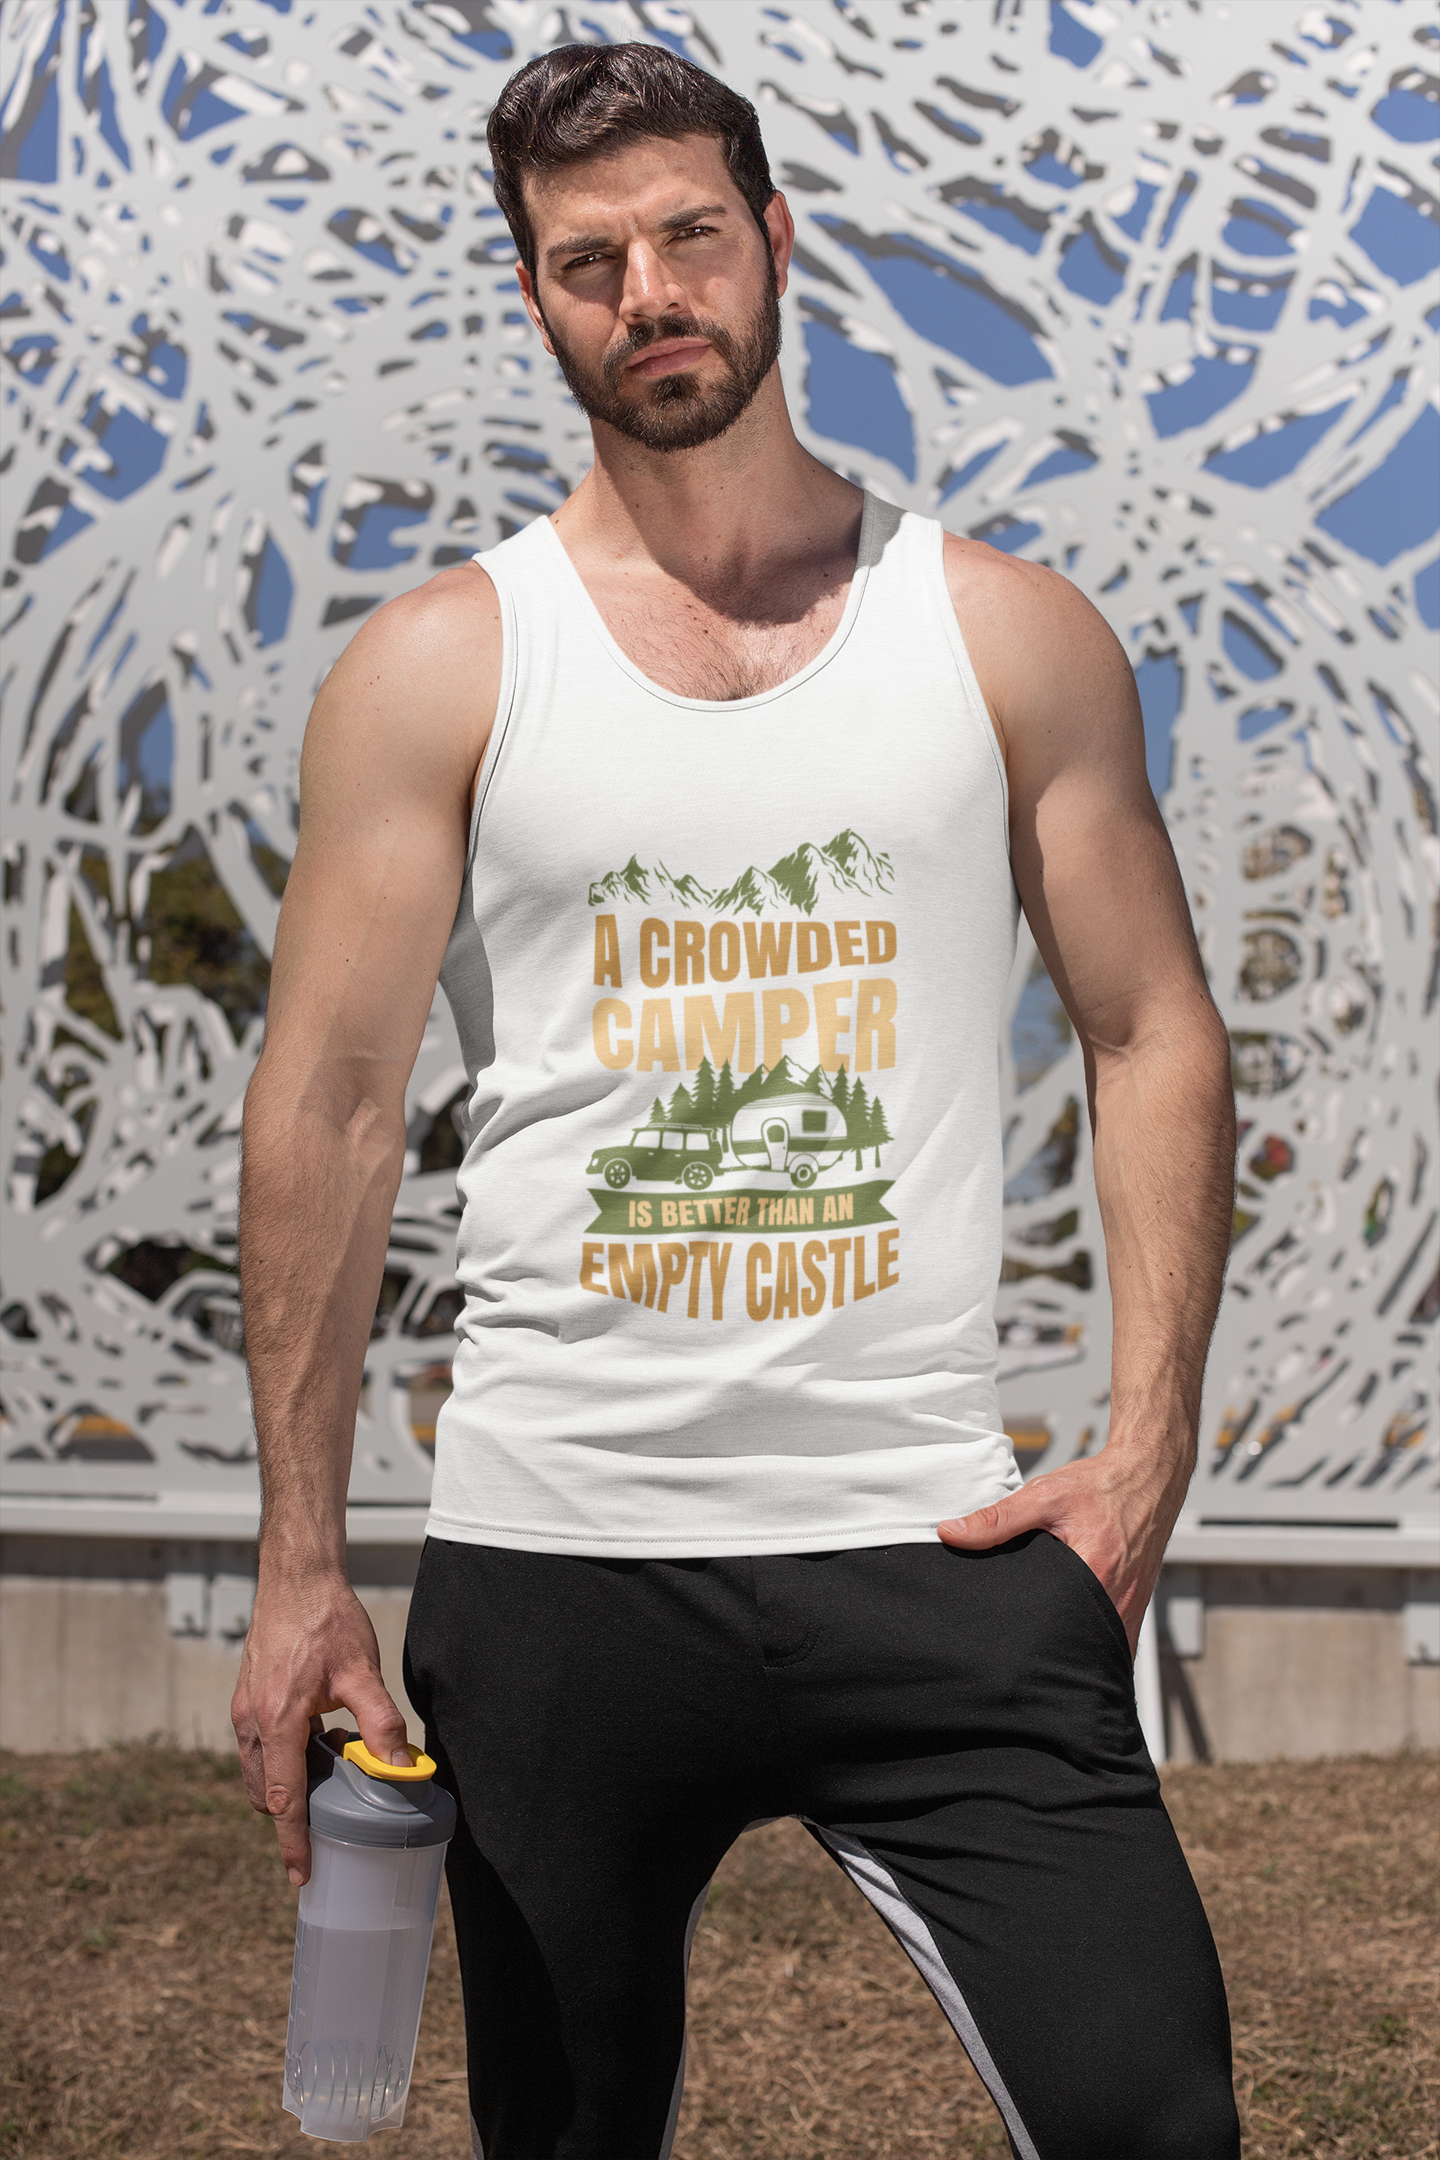 Crowded Camper and empty castle; 100% cotton tank top. Removable tag for comfort